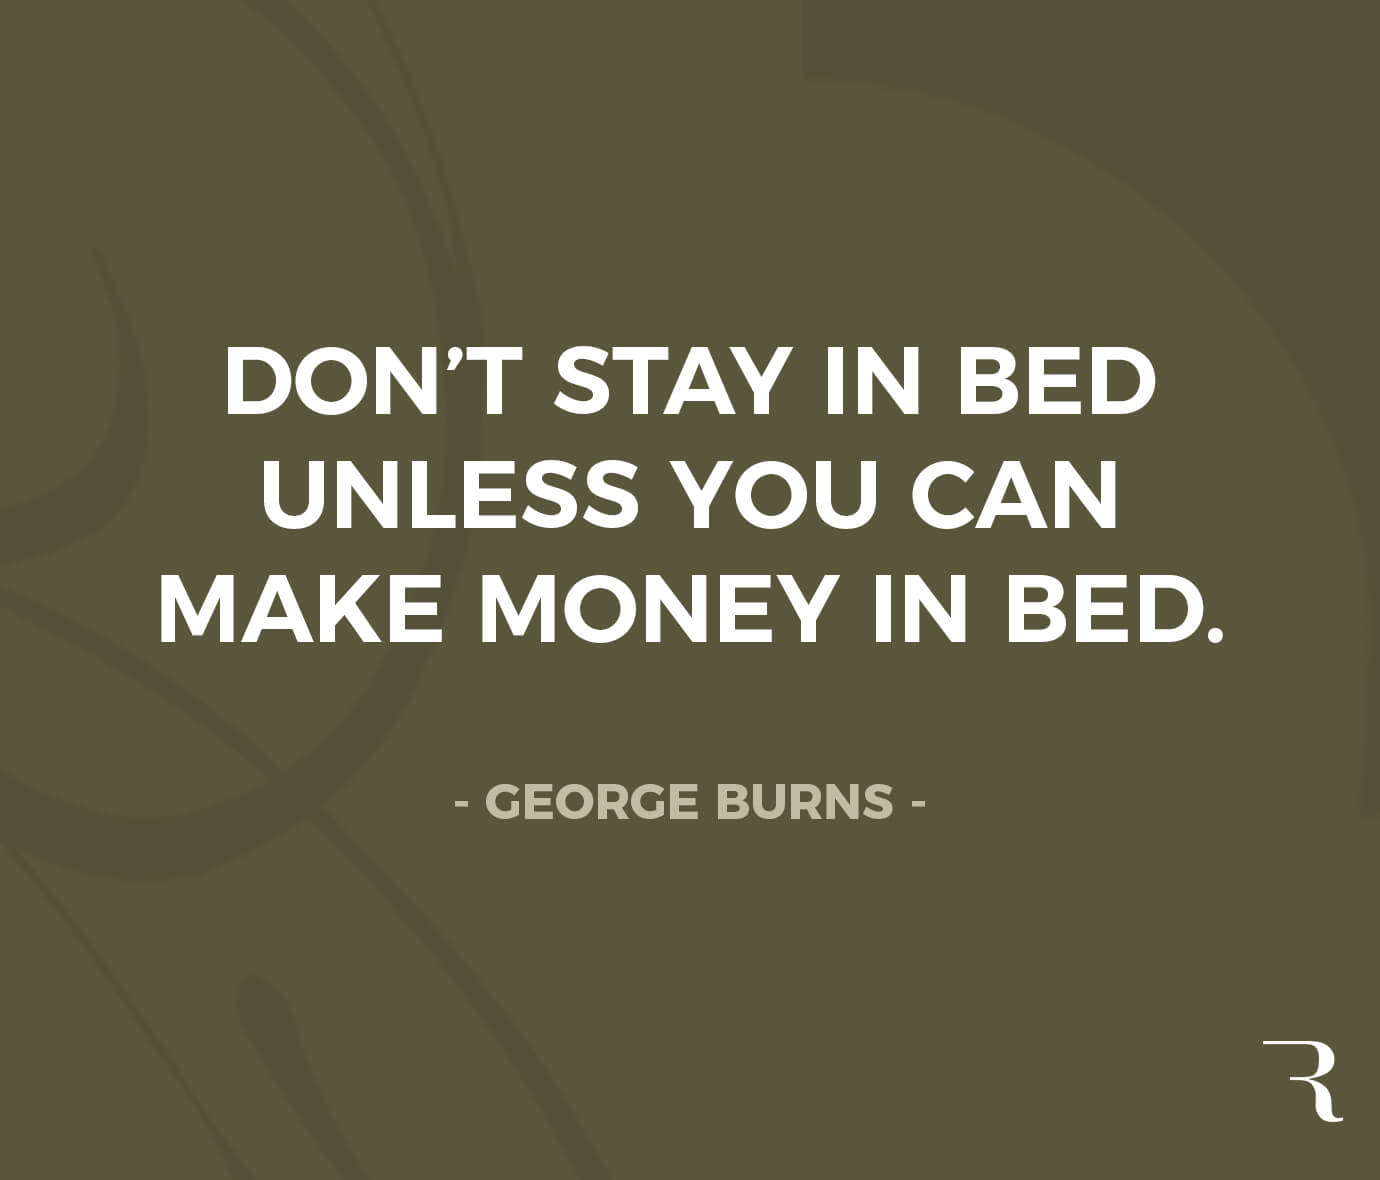 Motivational Quotes: “Don’t stay in bed unless you can make money in bed.” 112 Motivational Quotes to Be a Better Entrepreneur